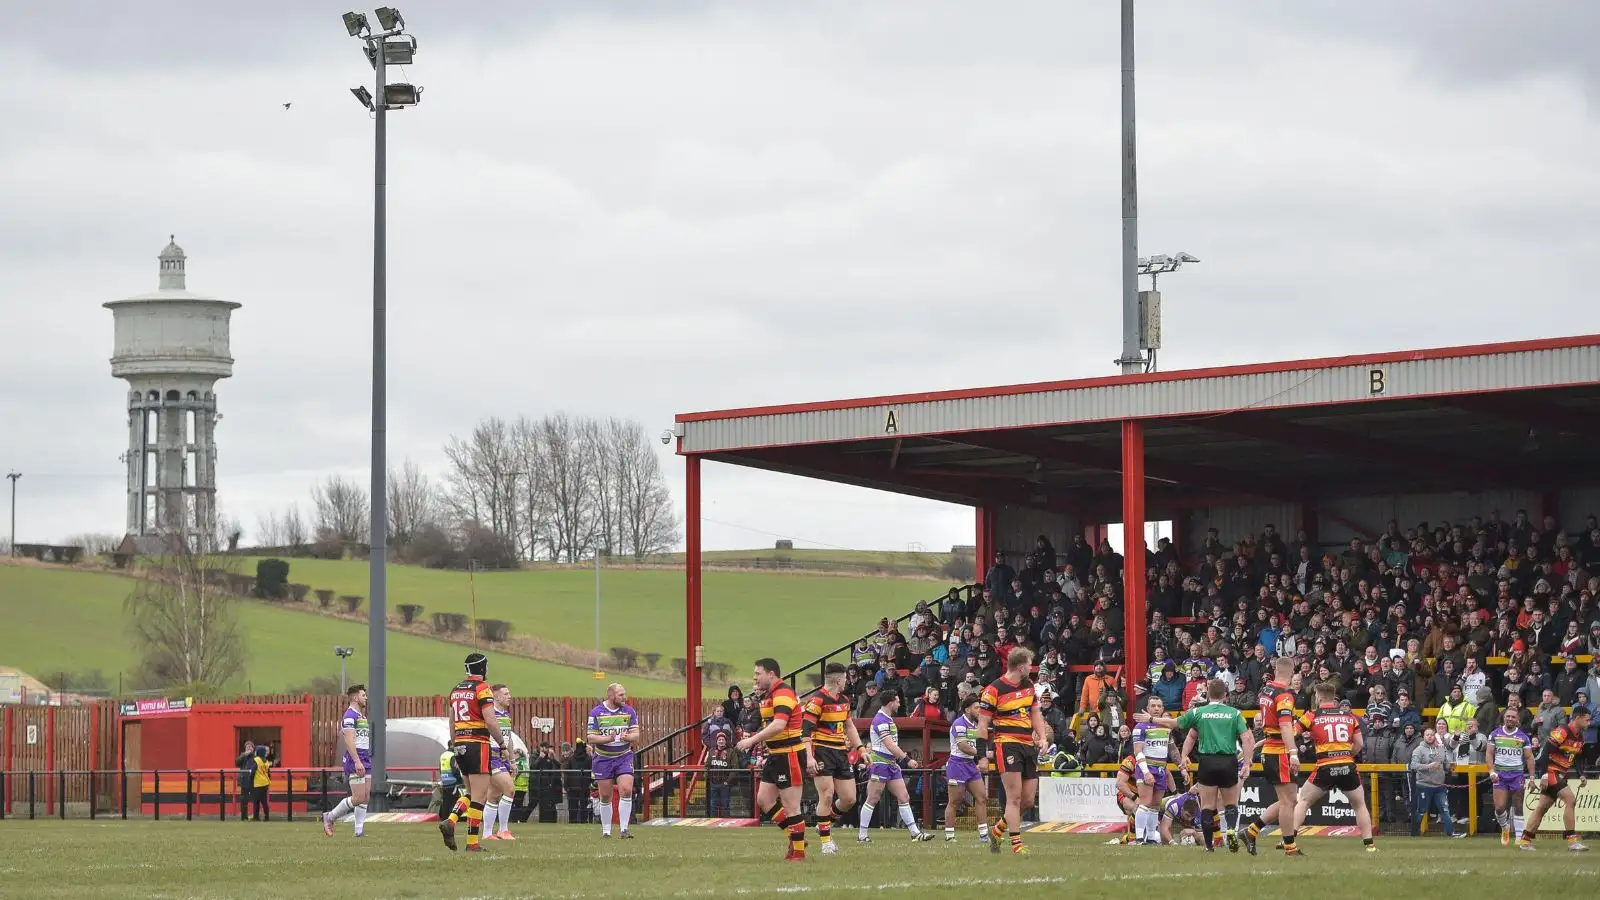 Dewsbury Rams sign hooker who will follow in father’s footsteps following spell in Australia